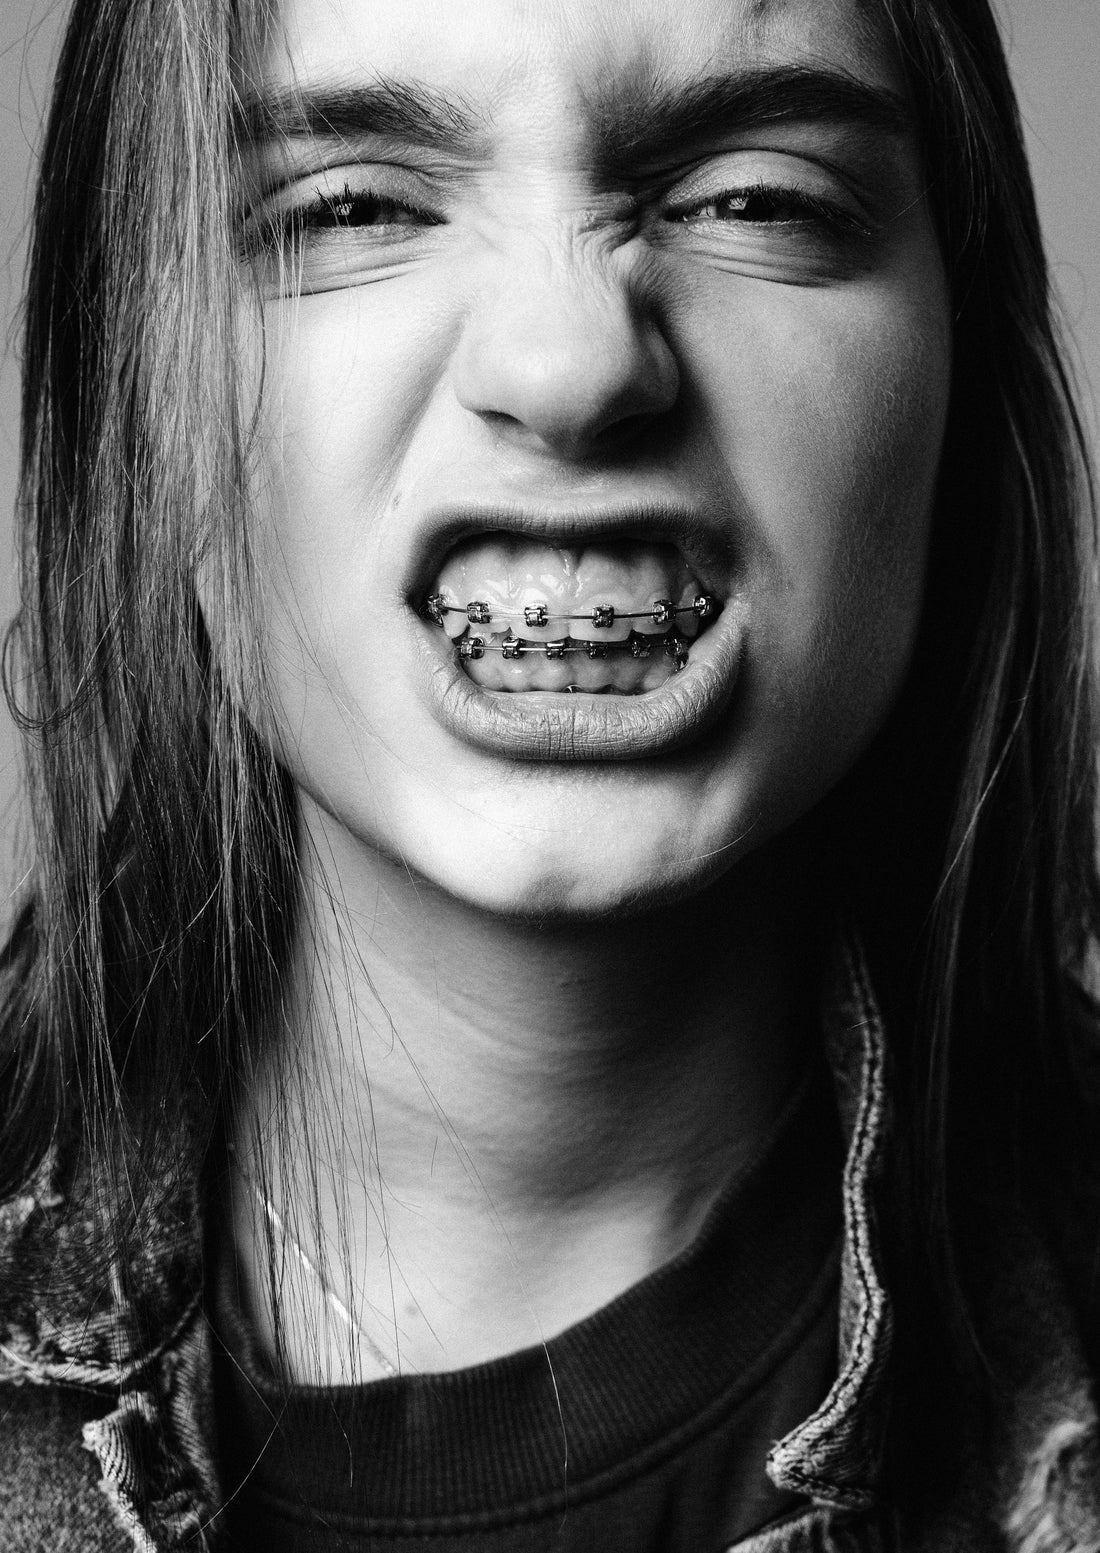 Long haired girl with braces showing off her teeth, for AutoBrush